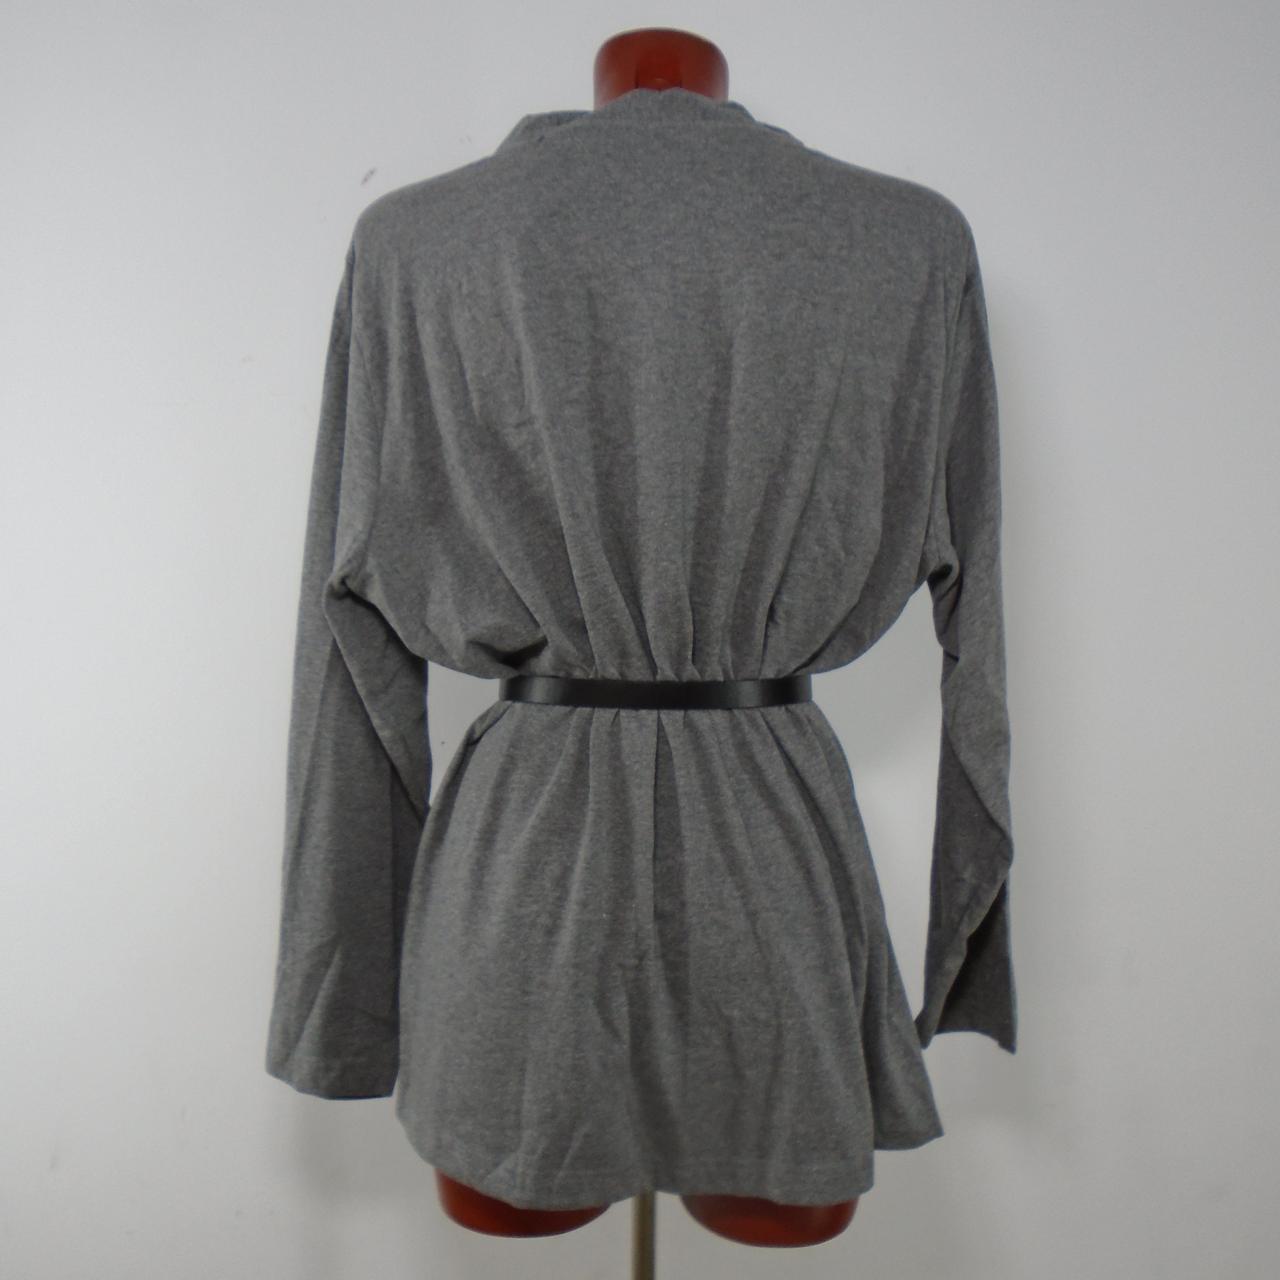 Women's Cardigan Italy Moda. Grey. L. New without tags